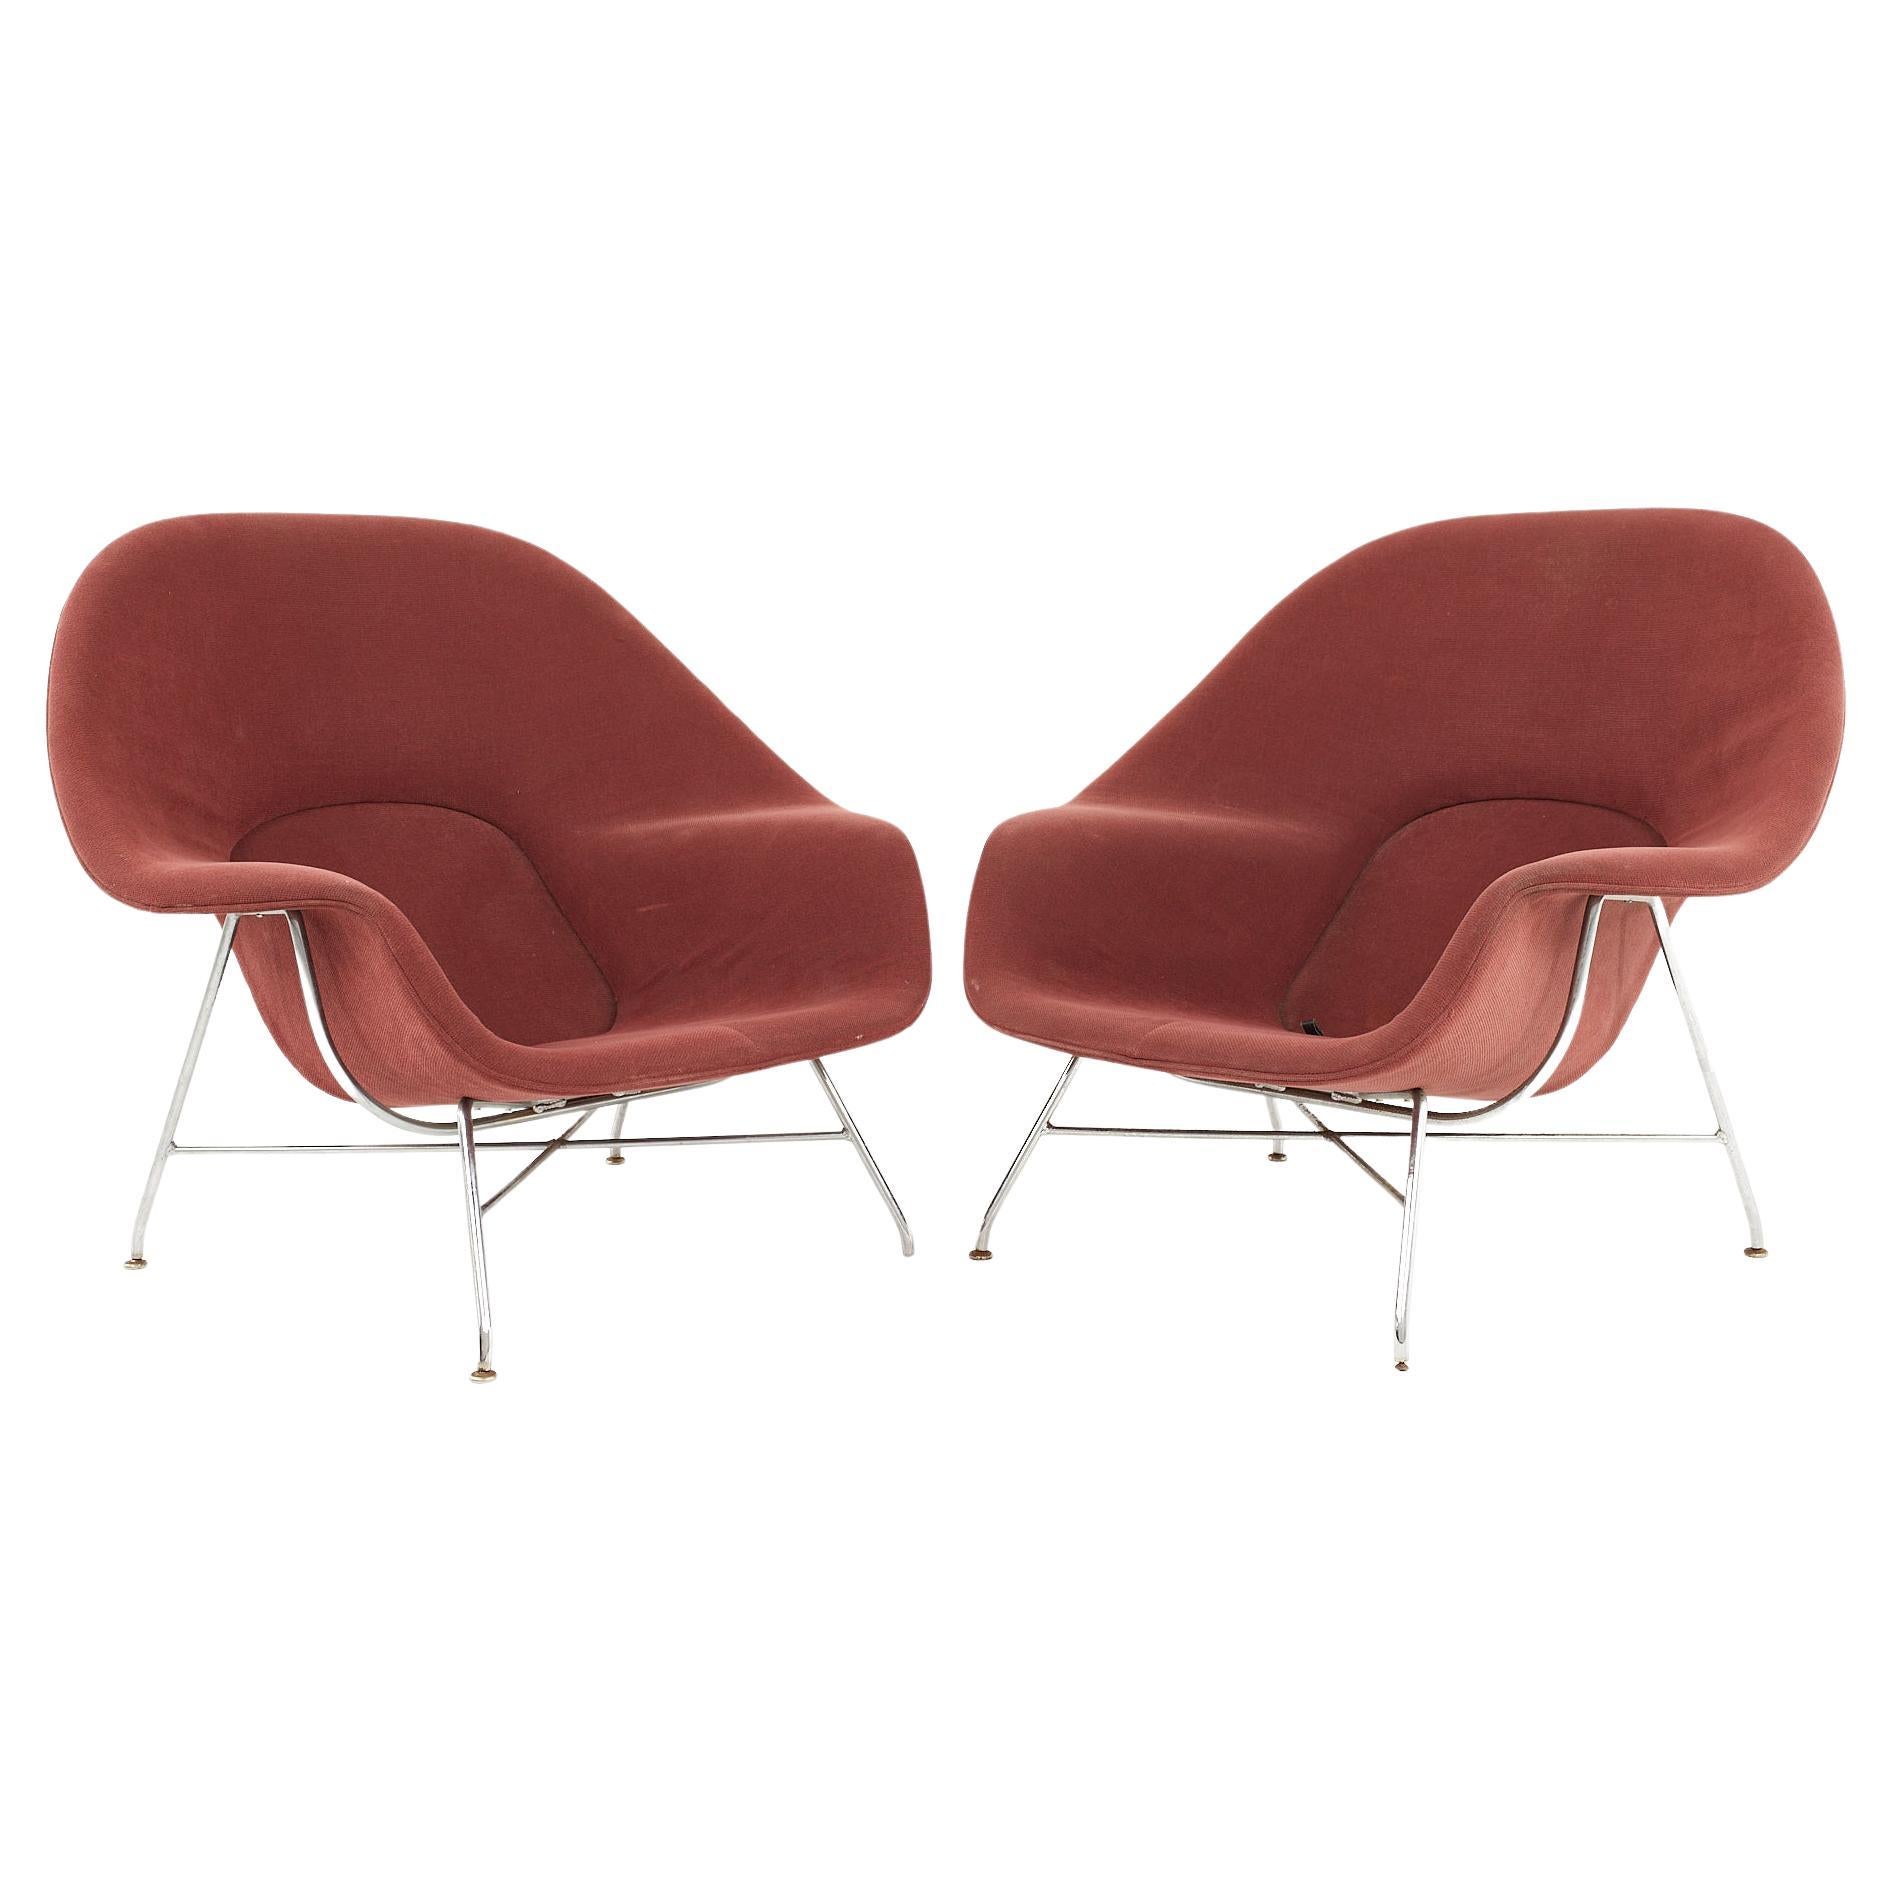 Eero Saarinen for Knoll Mid Century Womb Chair with Chrome Frame, Set of 2 For Sale